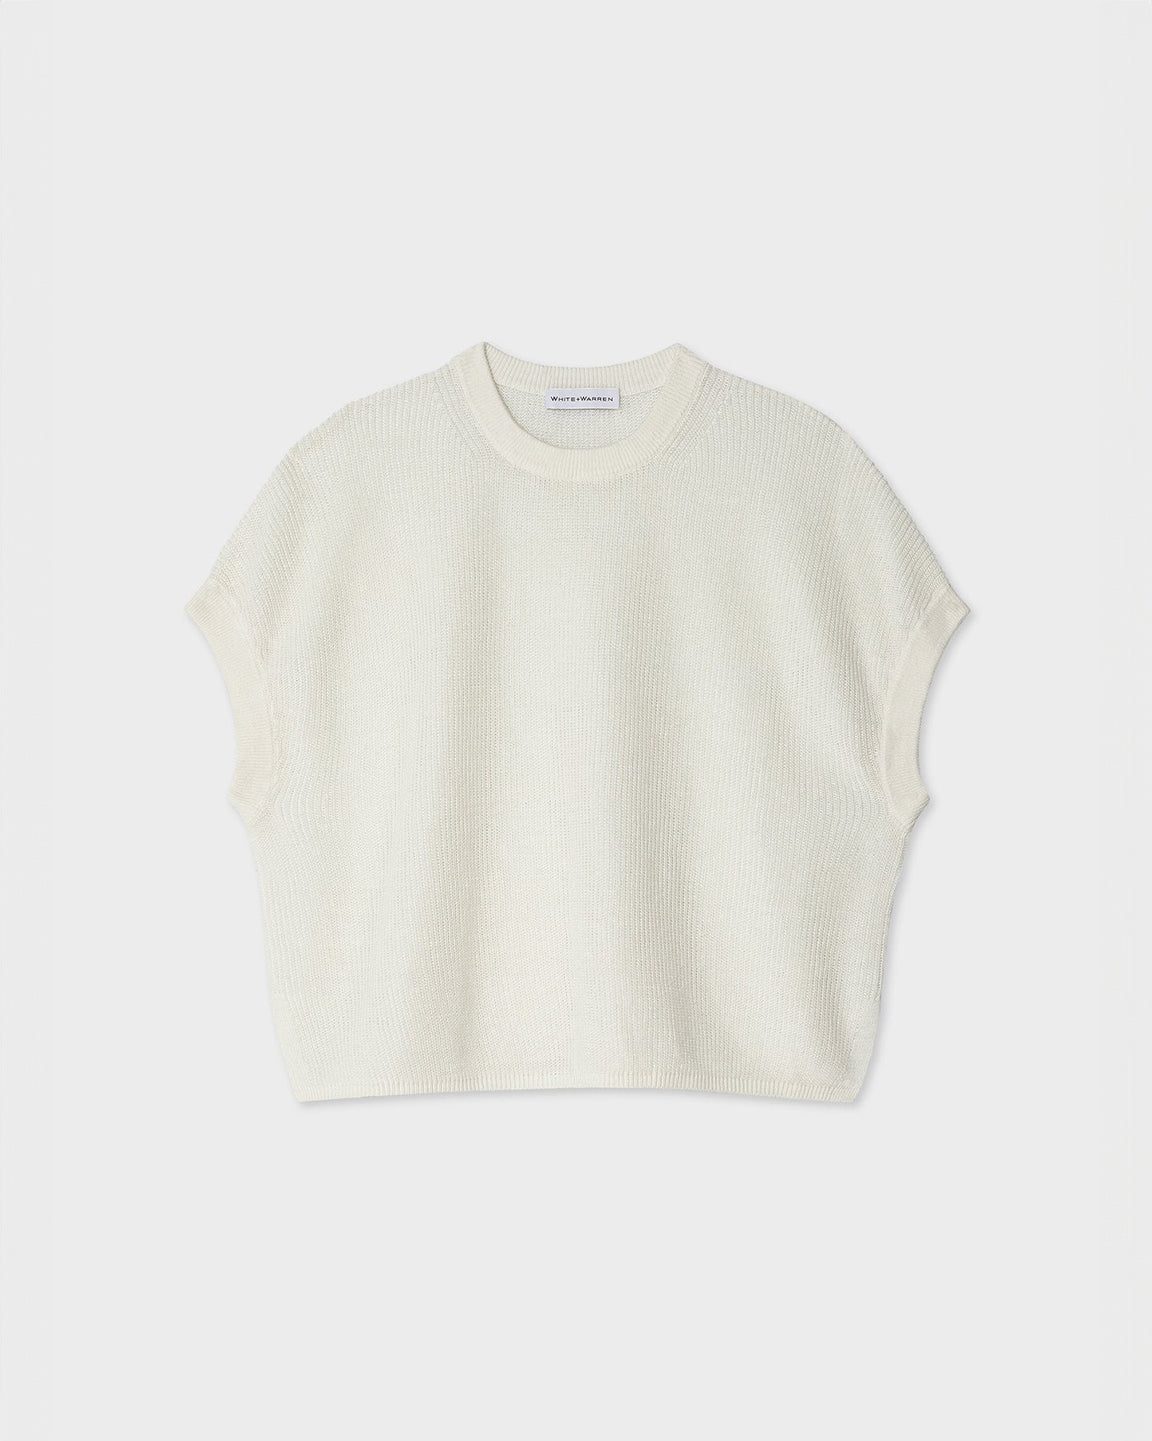 White and Warren Classic Linen Ribbed T-Shirt in White